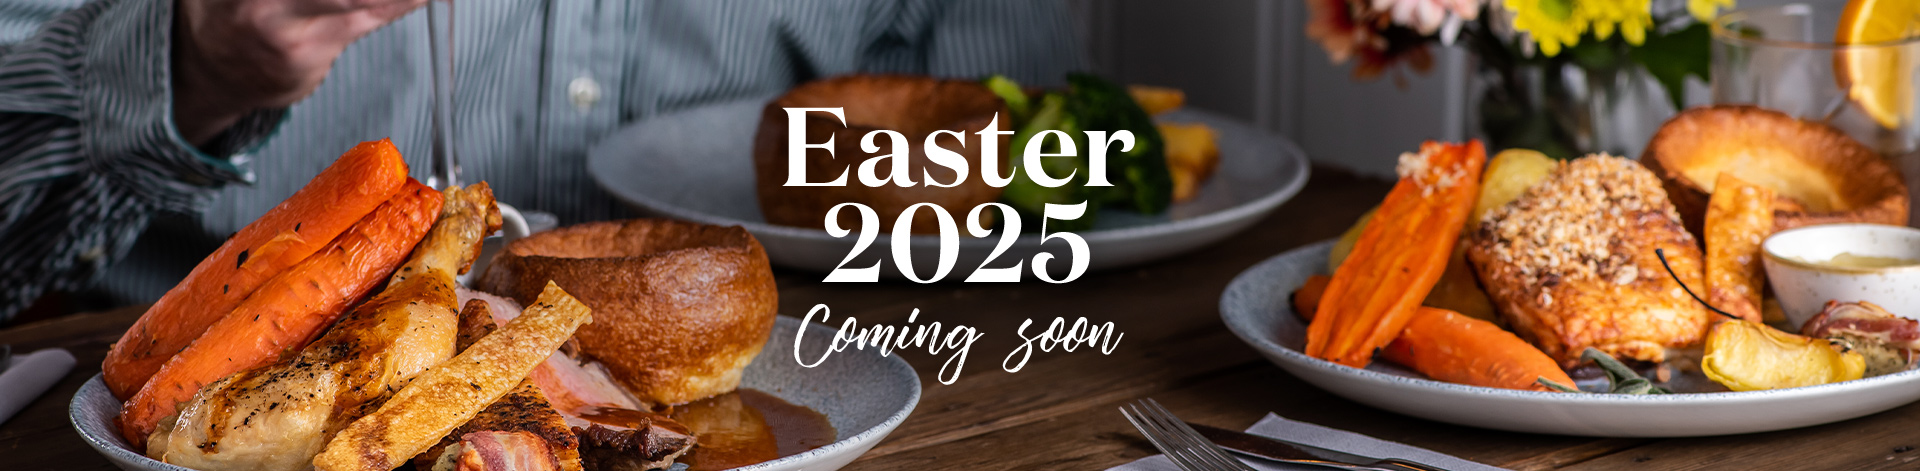 Easter at The Fitzwilliam Arms in Peterborough